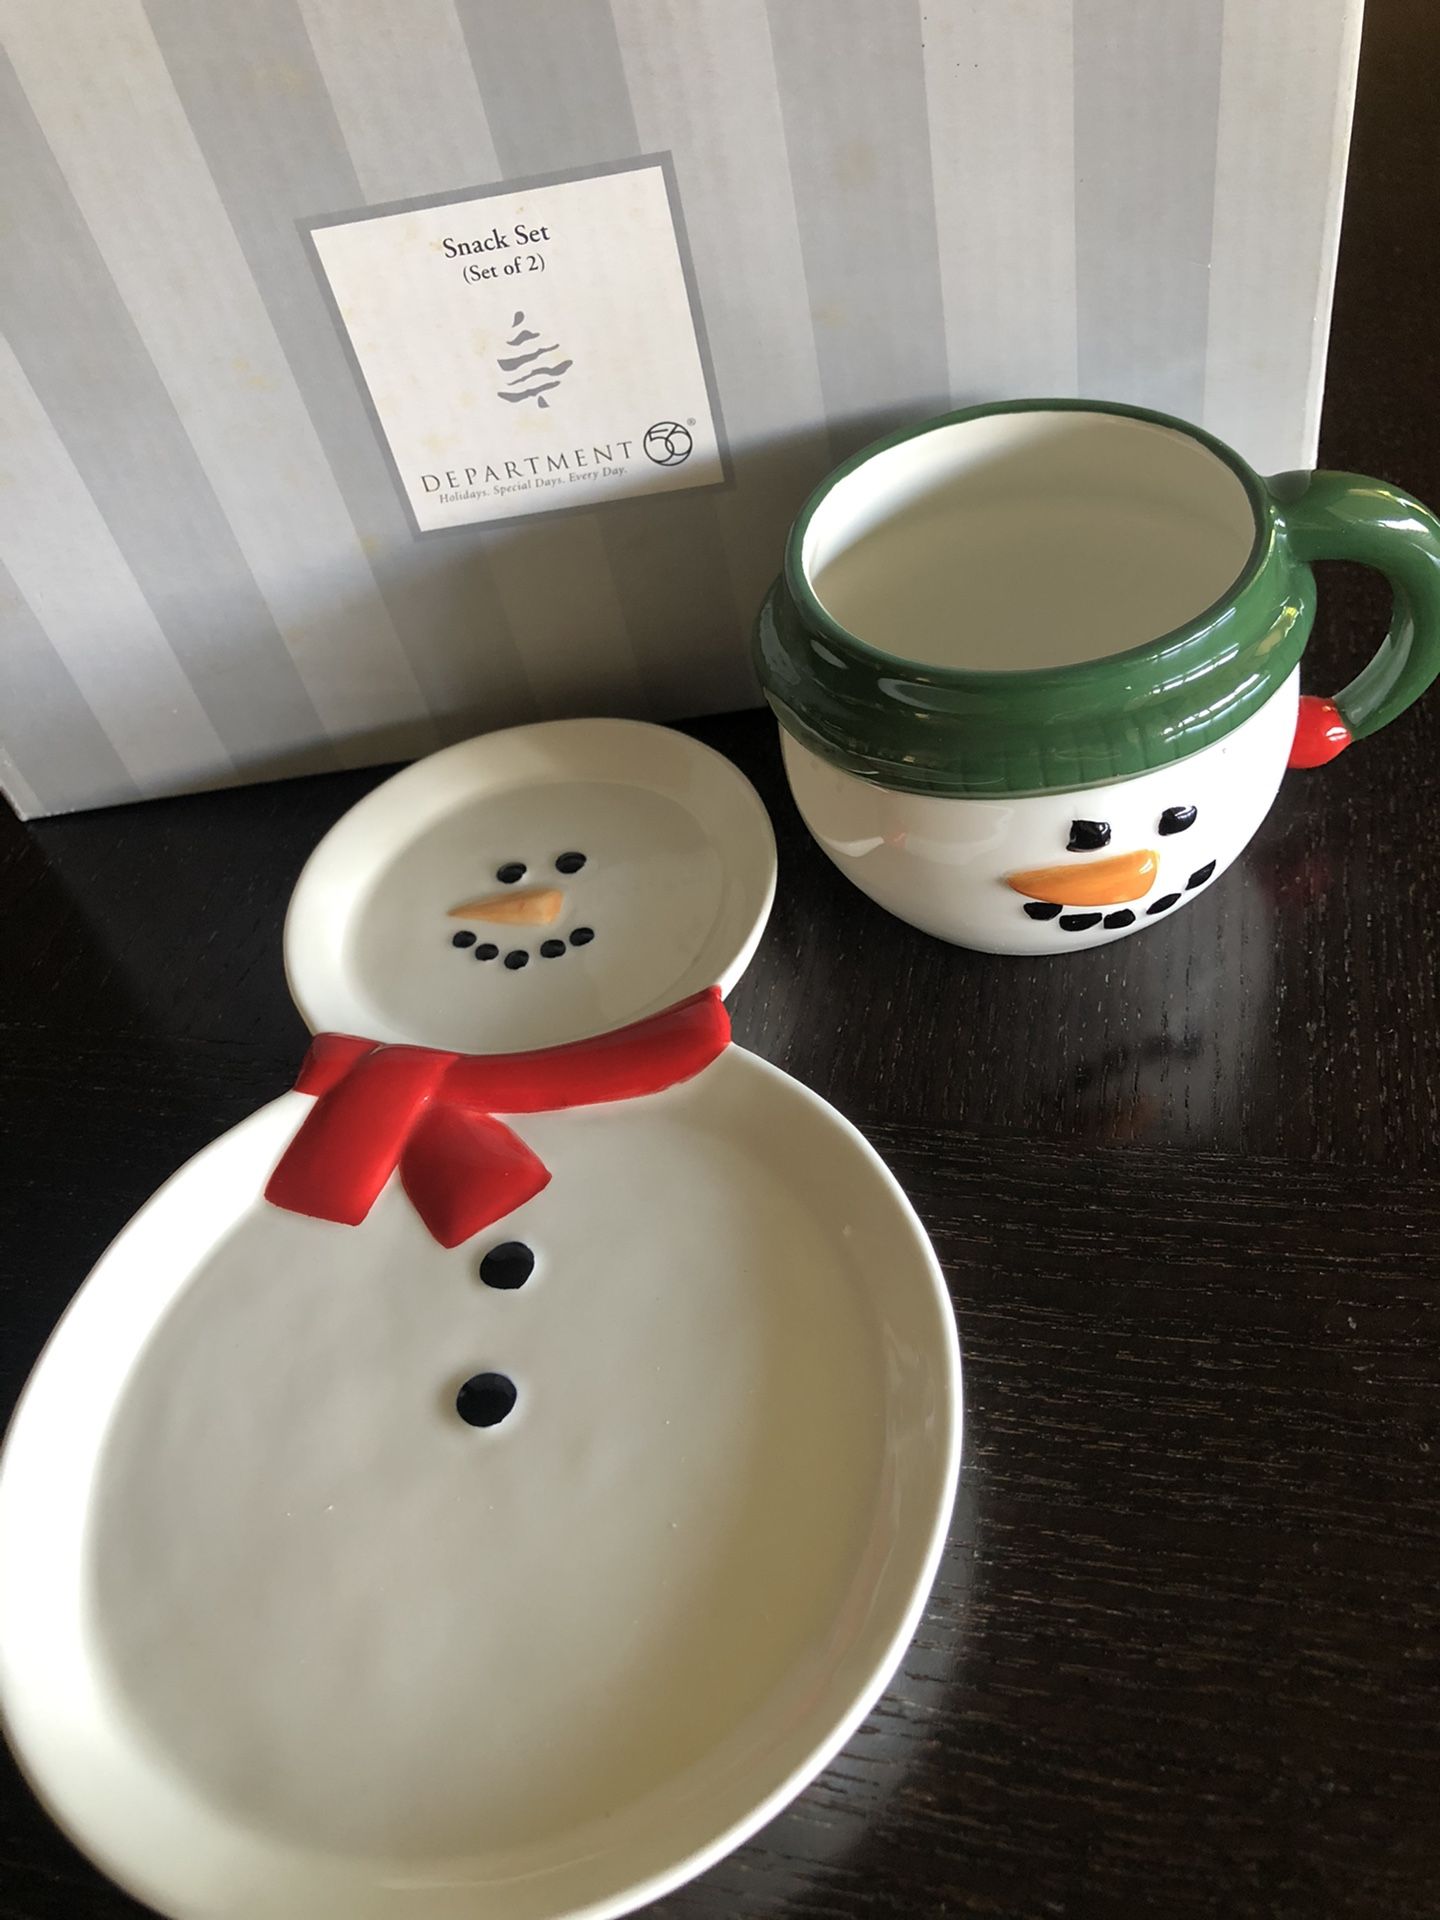 Brand new in box Department 56 Snack set snowman Christmas